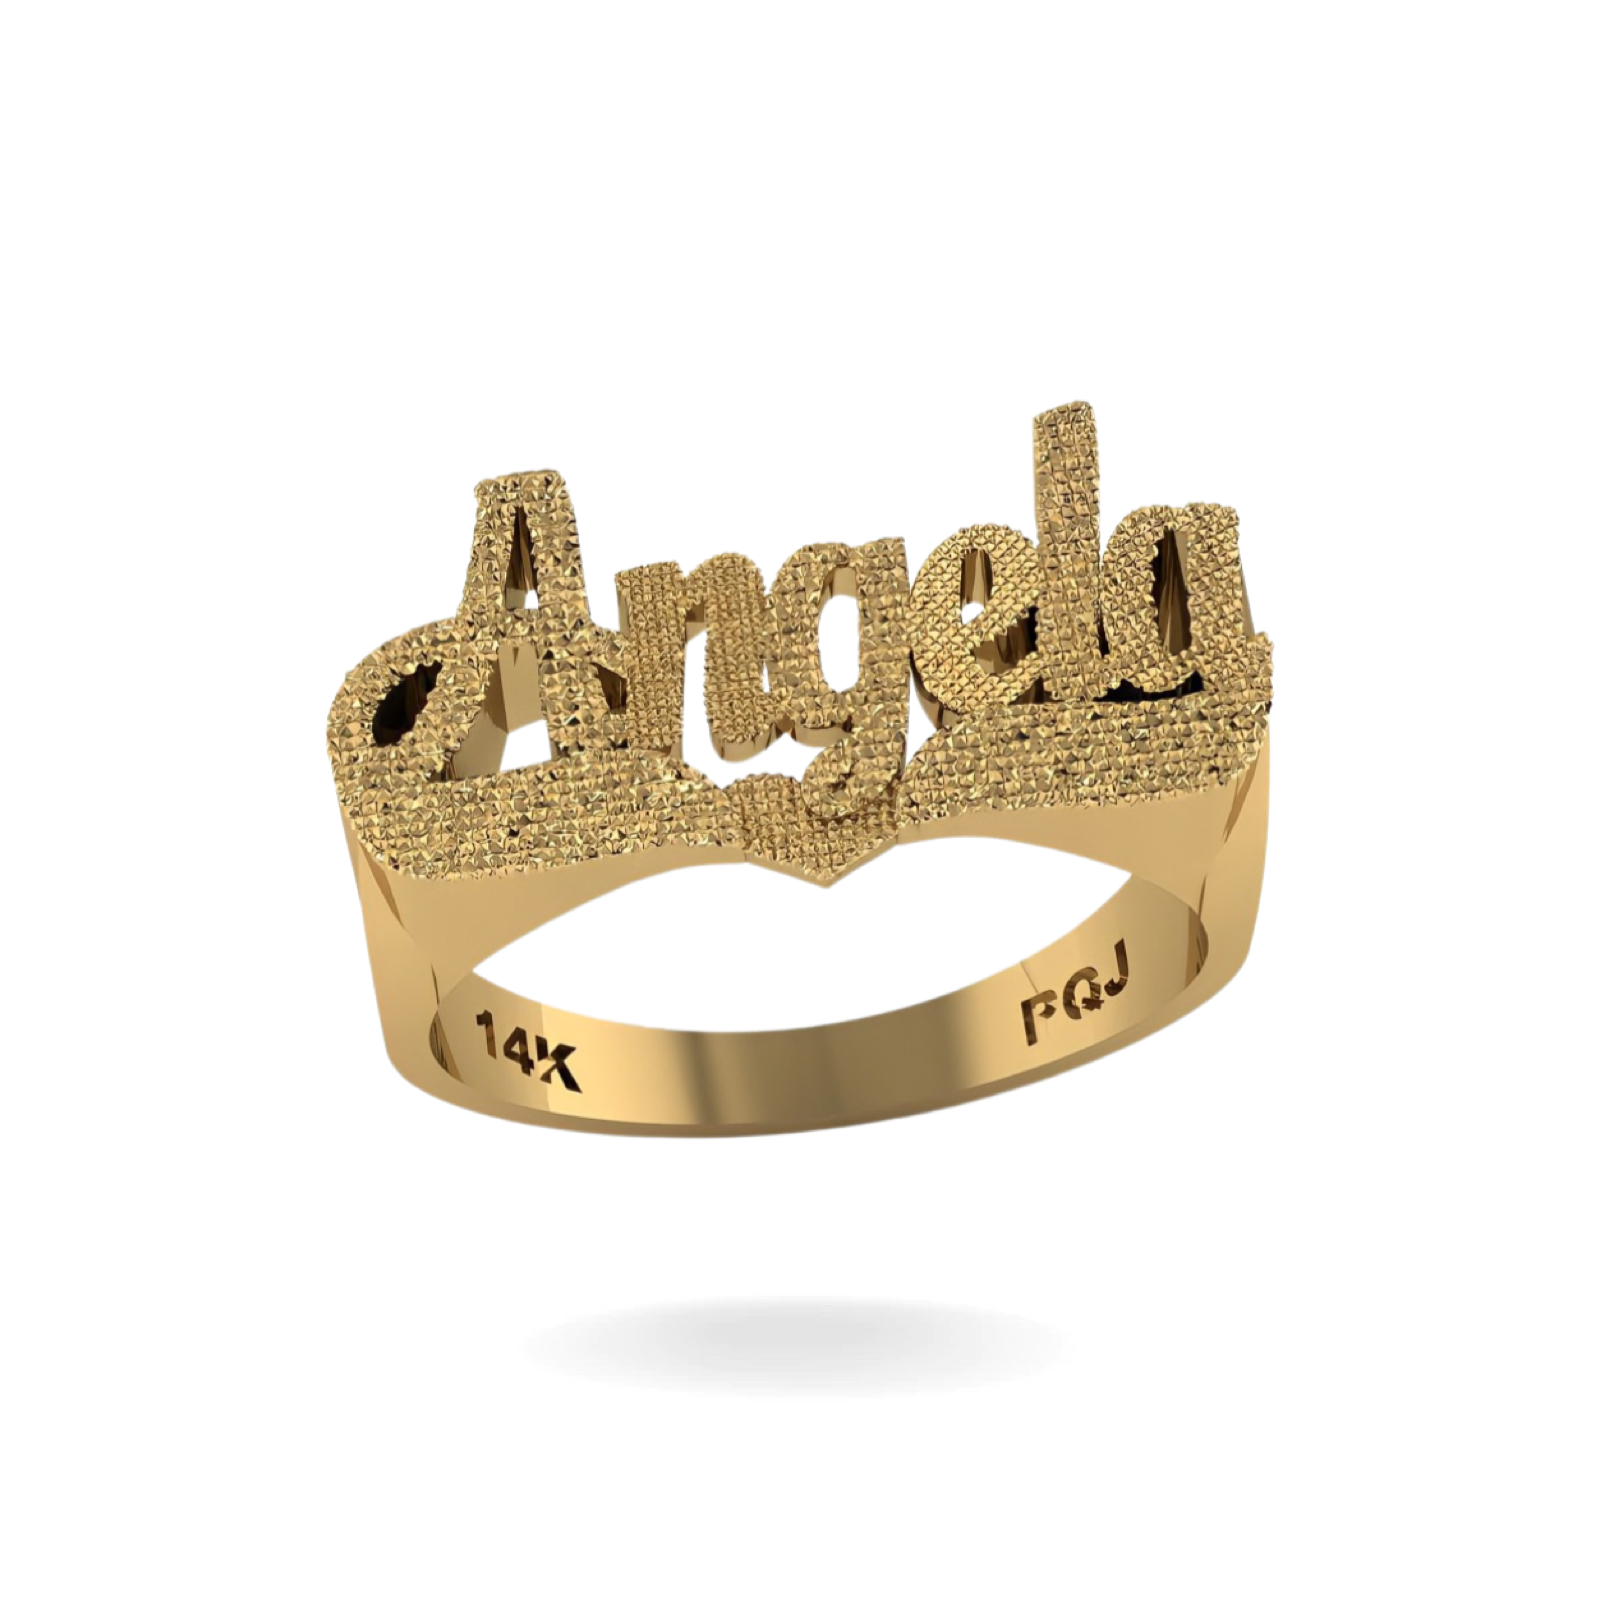 Custom Couple Ring Band / Engrave Your & Your Partner Name On Ring /  Gold/Silver/Brass at Rs 500/pair | Silver Band in Jaipur | ID: 22094039491